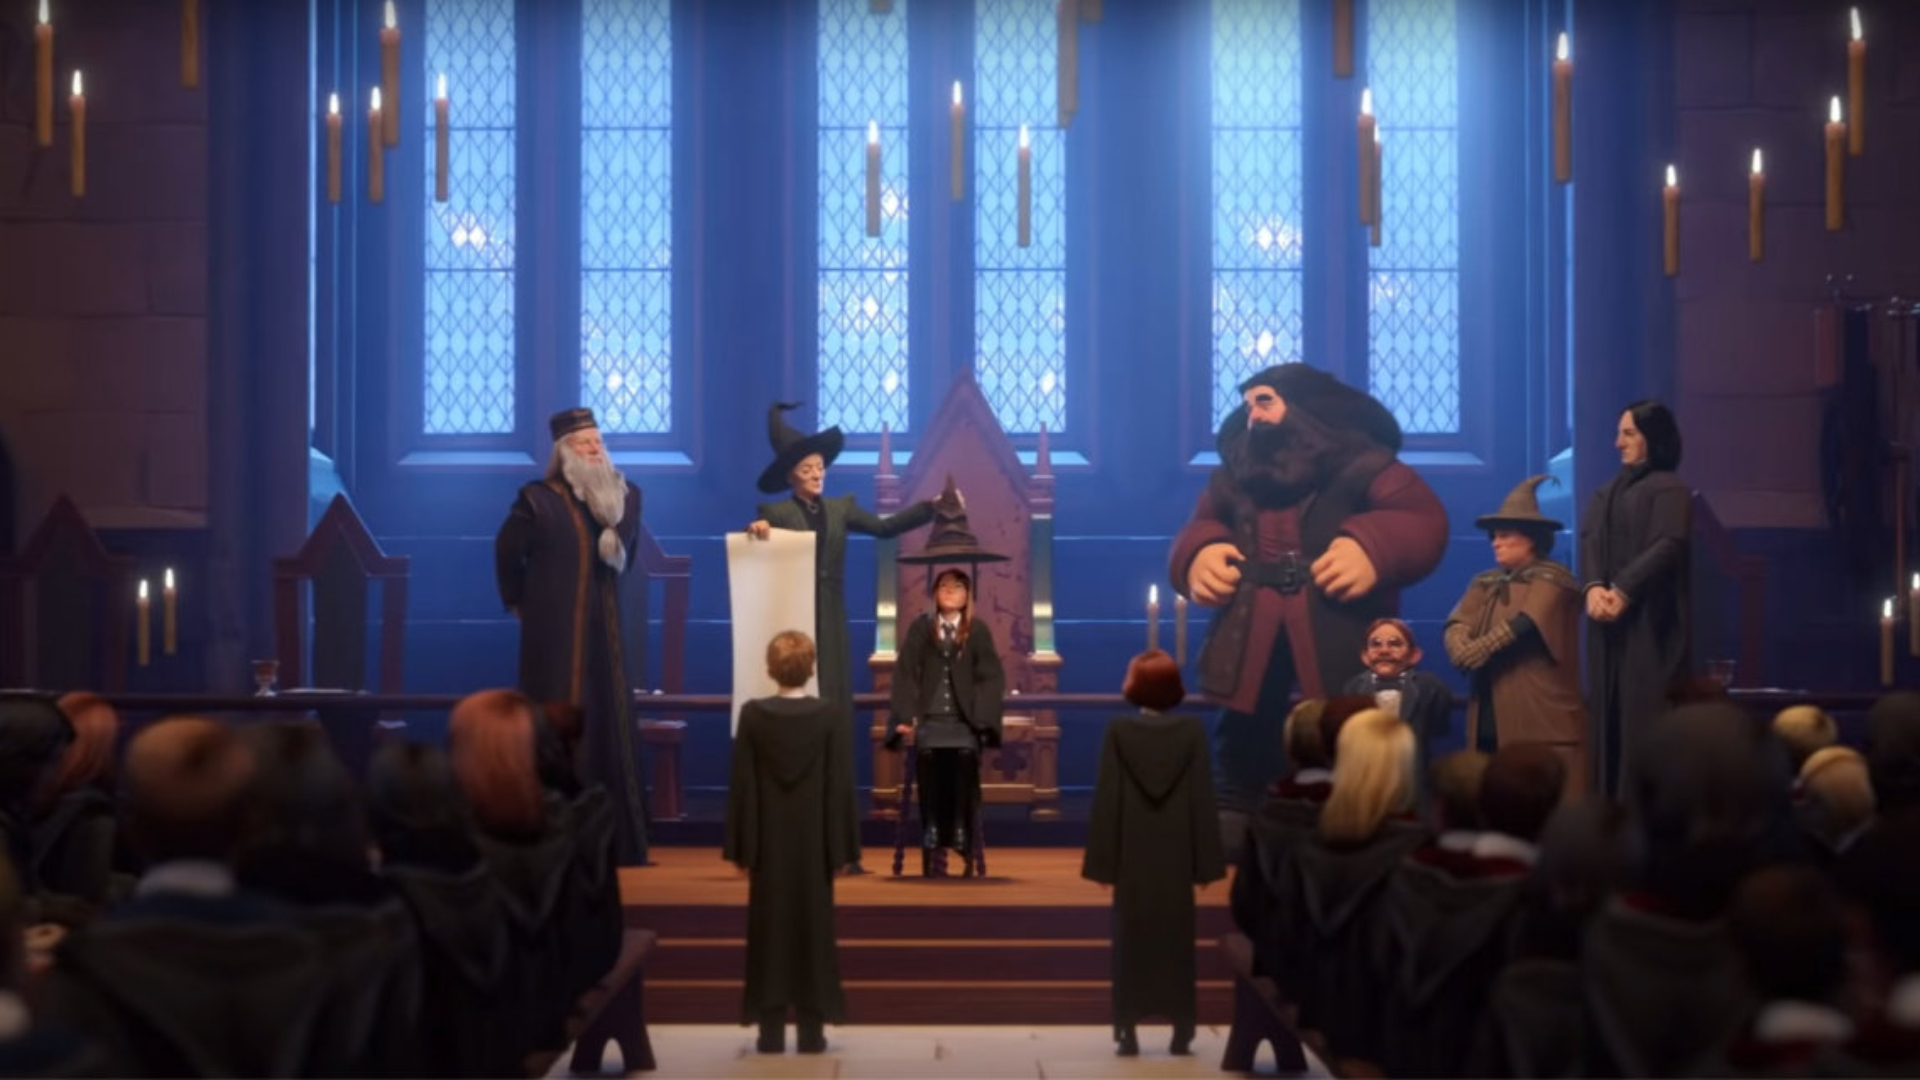 Best wizard games: Harry Potter: Hogwarts Mystery. Image shows a student in the grand hall of Hogwarts about to have the sorting hat put on.